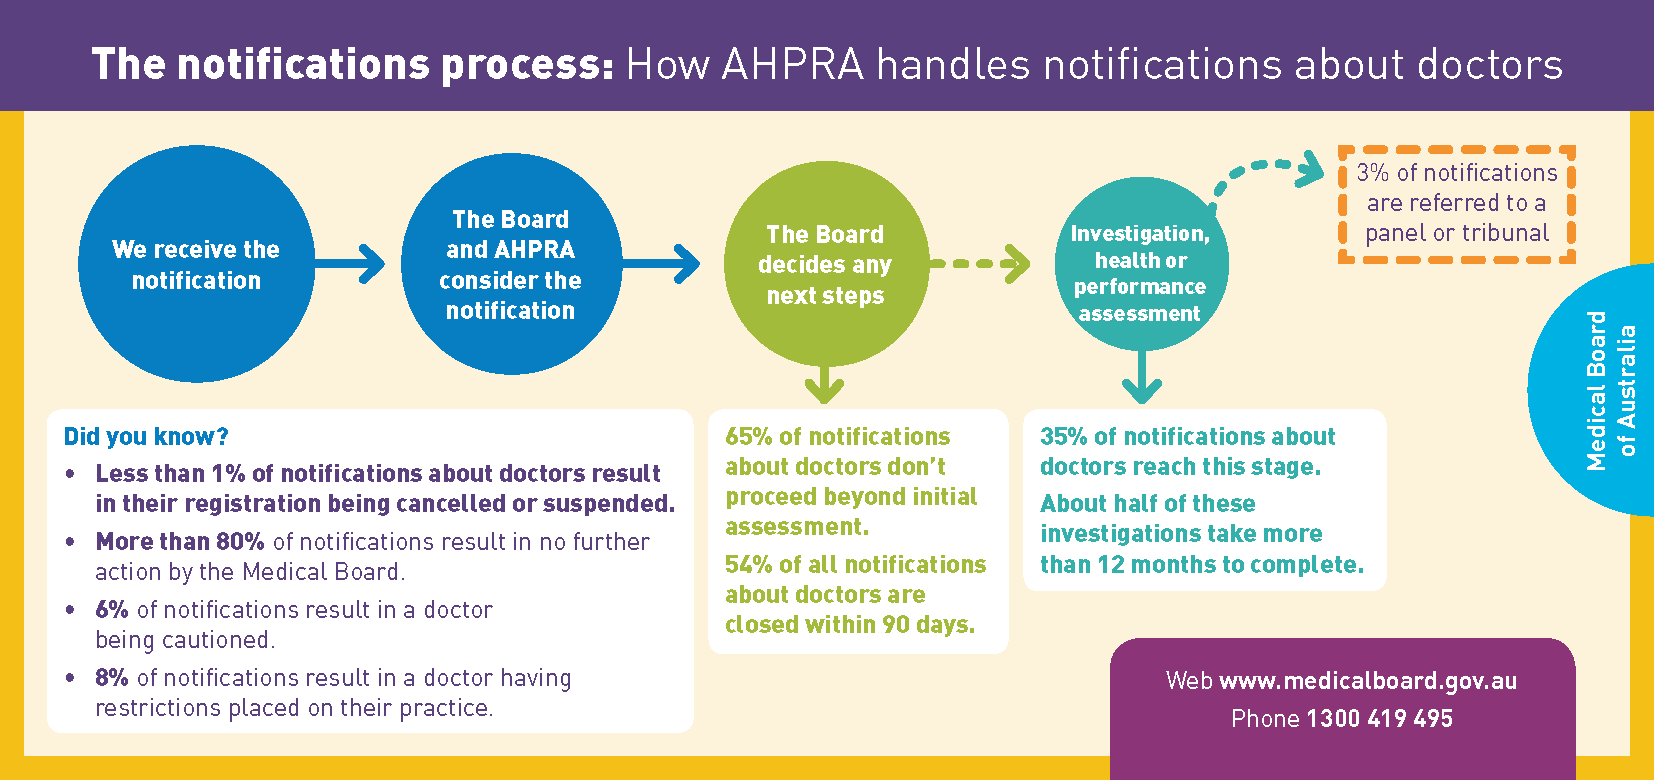 The notifications process: How AHPRA handles notifications